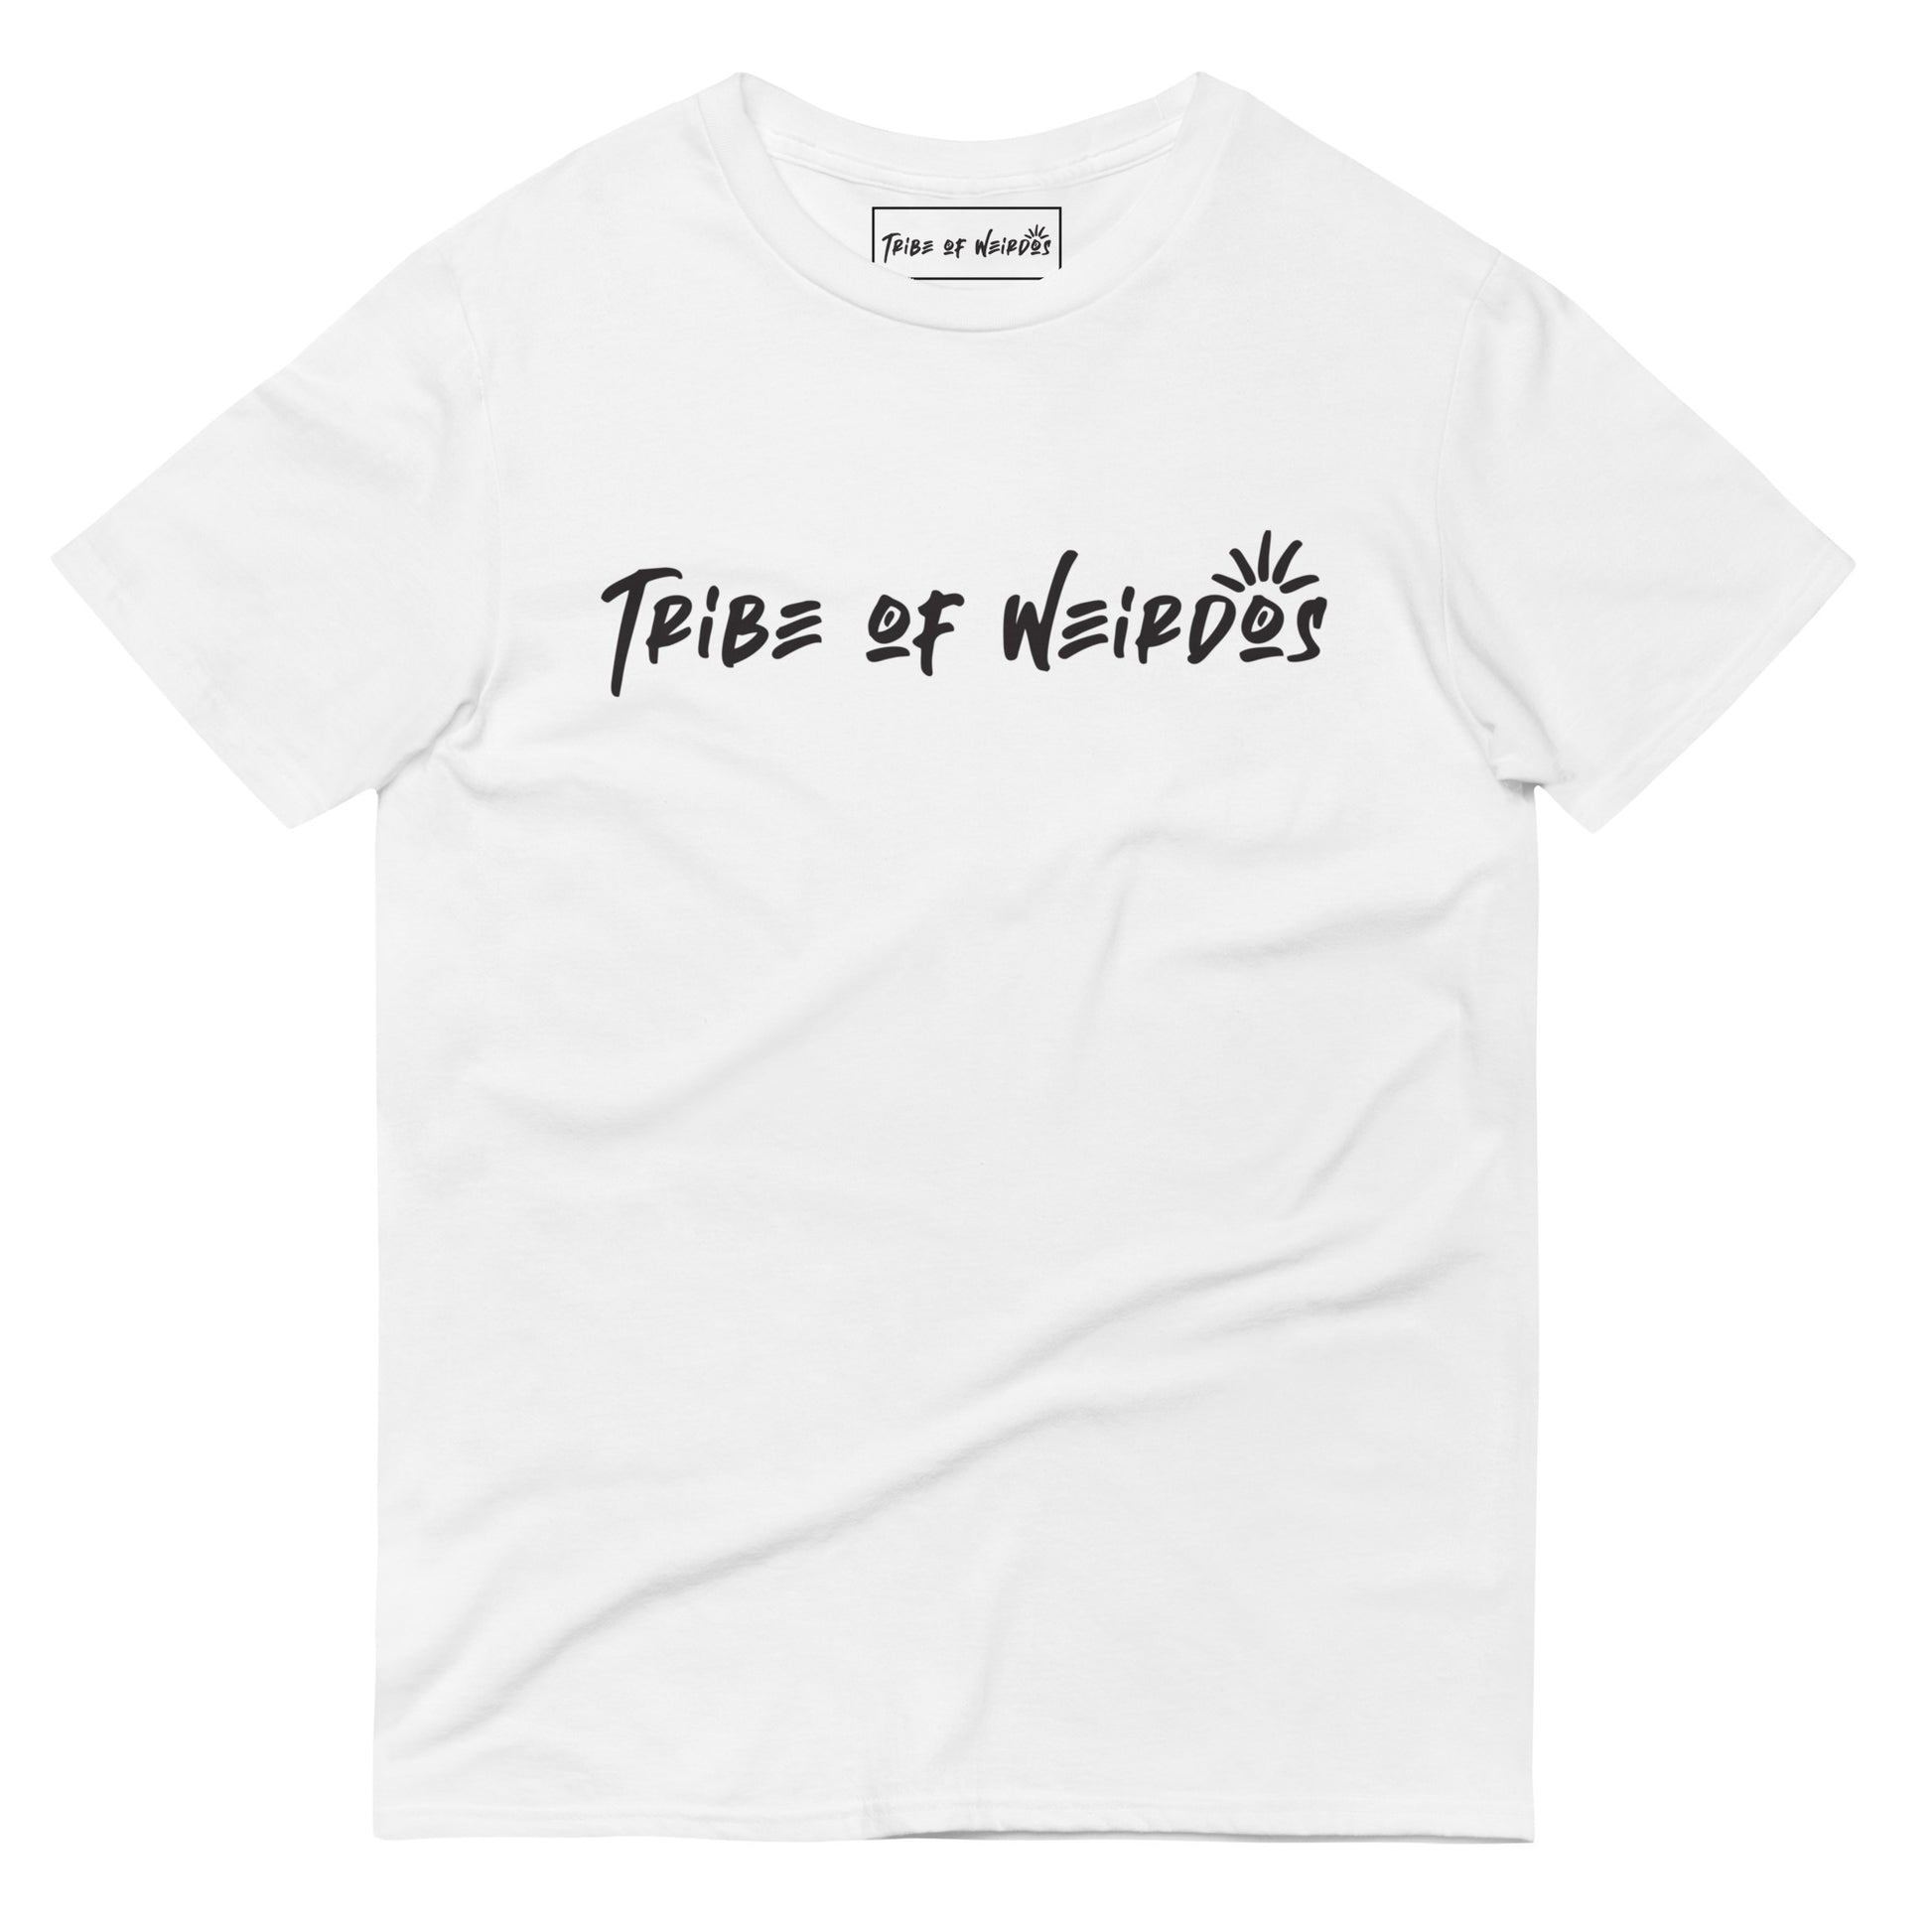 Join The Tribe' Unisex T-Shirt by Tribe of Weirdos, an invitation to be part of a community that values authenticity and connection.